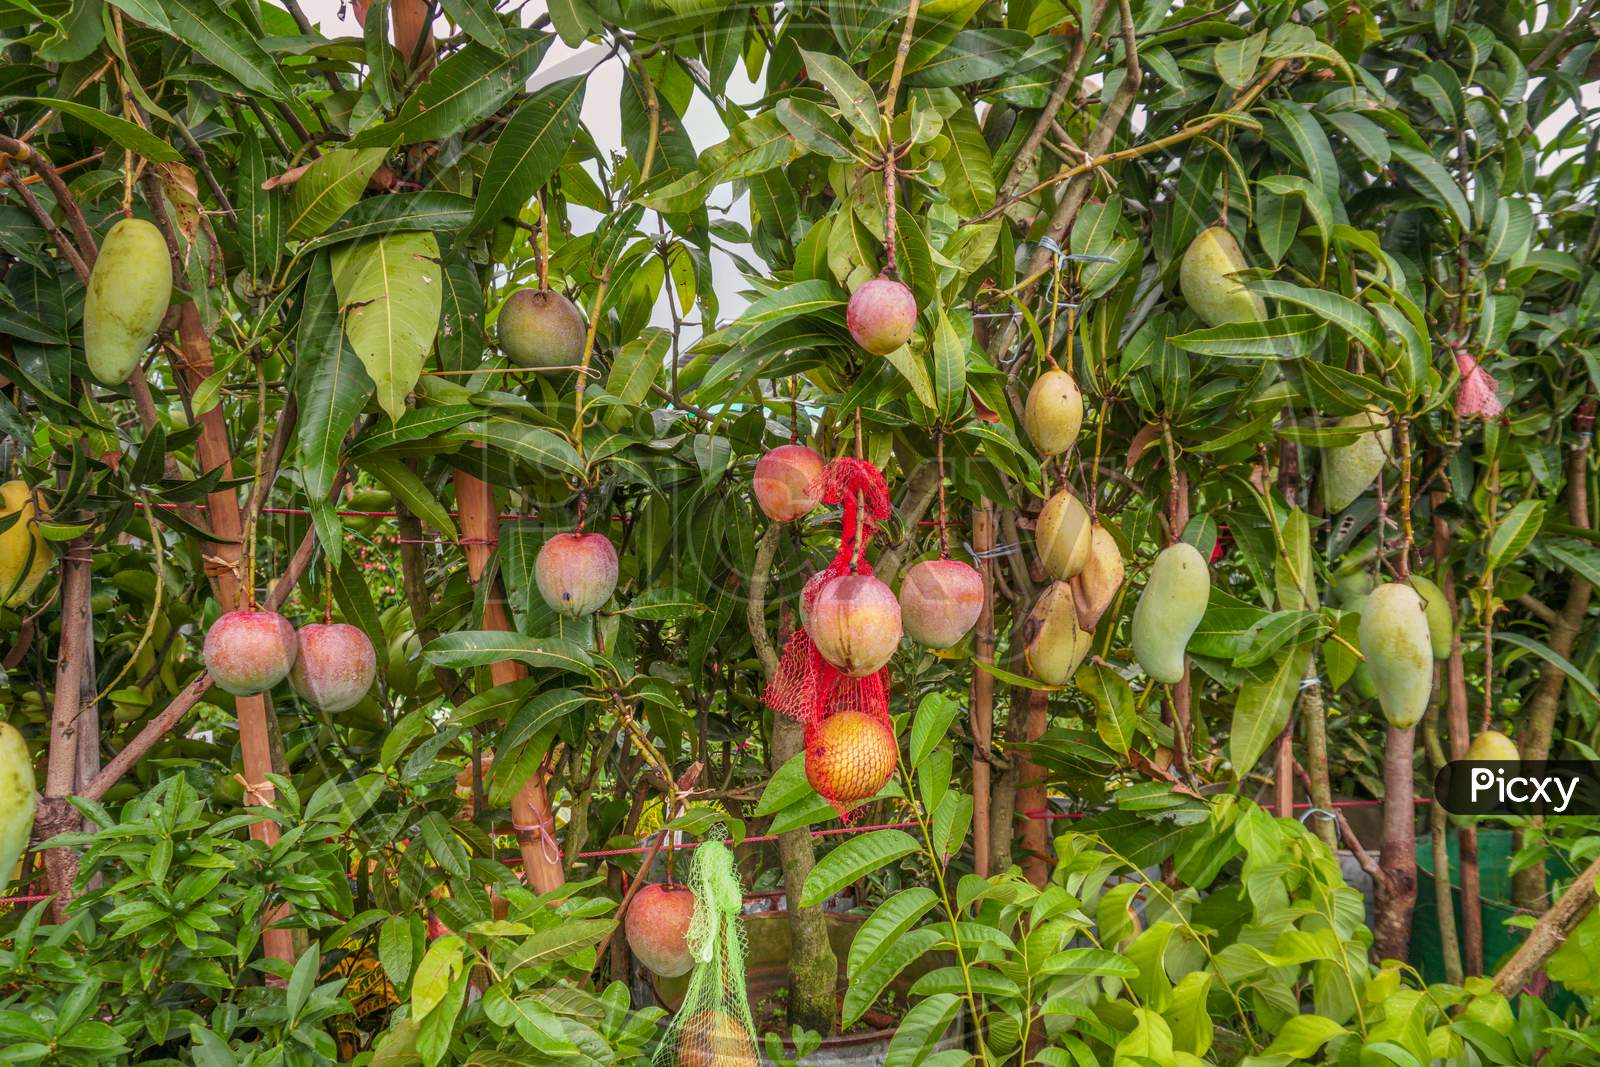 A Mango Hangs In A Beautiful Garden. This Is A Delicious Fruit. Mango Is Very Dear To All The People Of The World. It Is Very Fun To Eat Both Raw And Ripe. There Are A Lot Of Mango Orchards In Bangladesh.